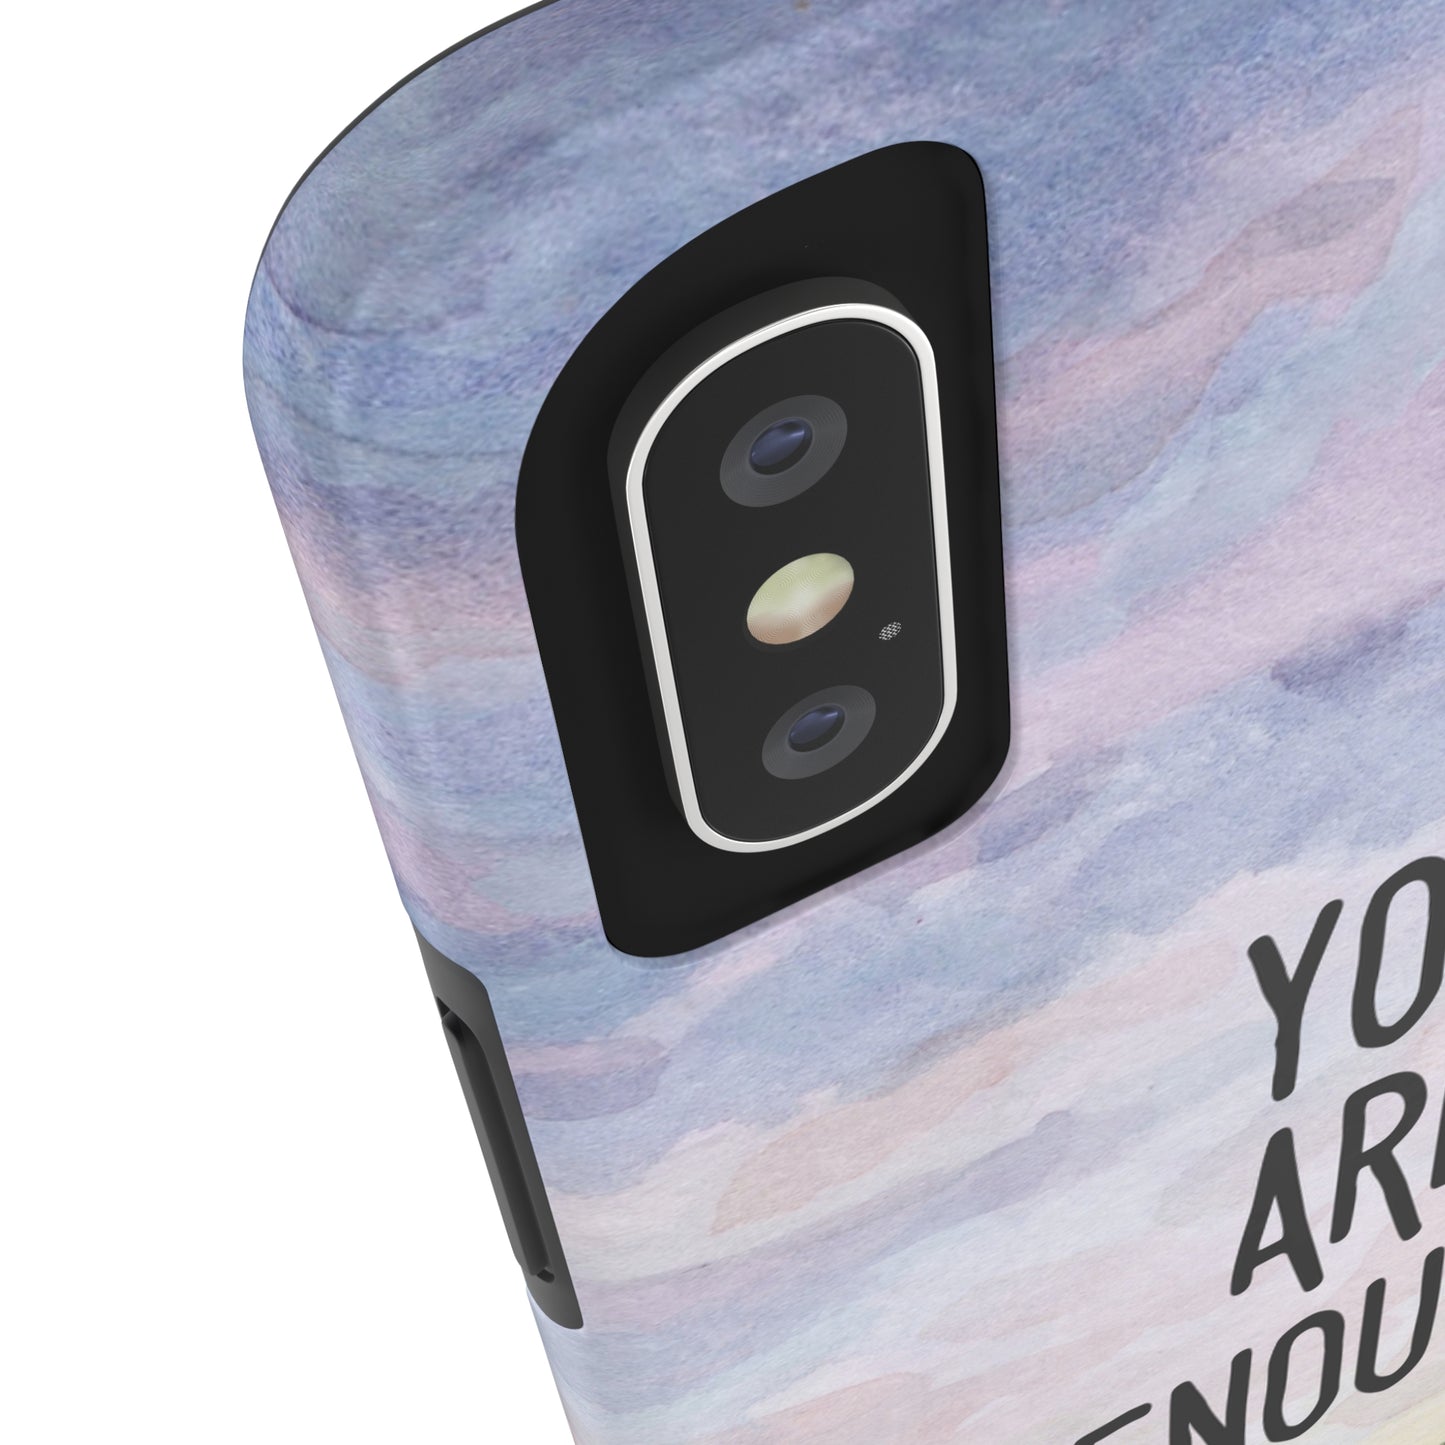 You Are Enough Phone Case